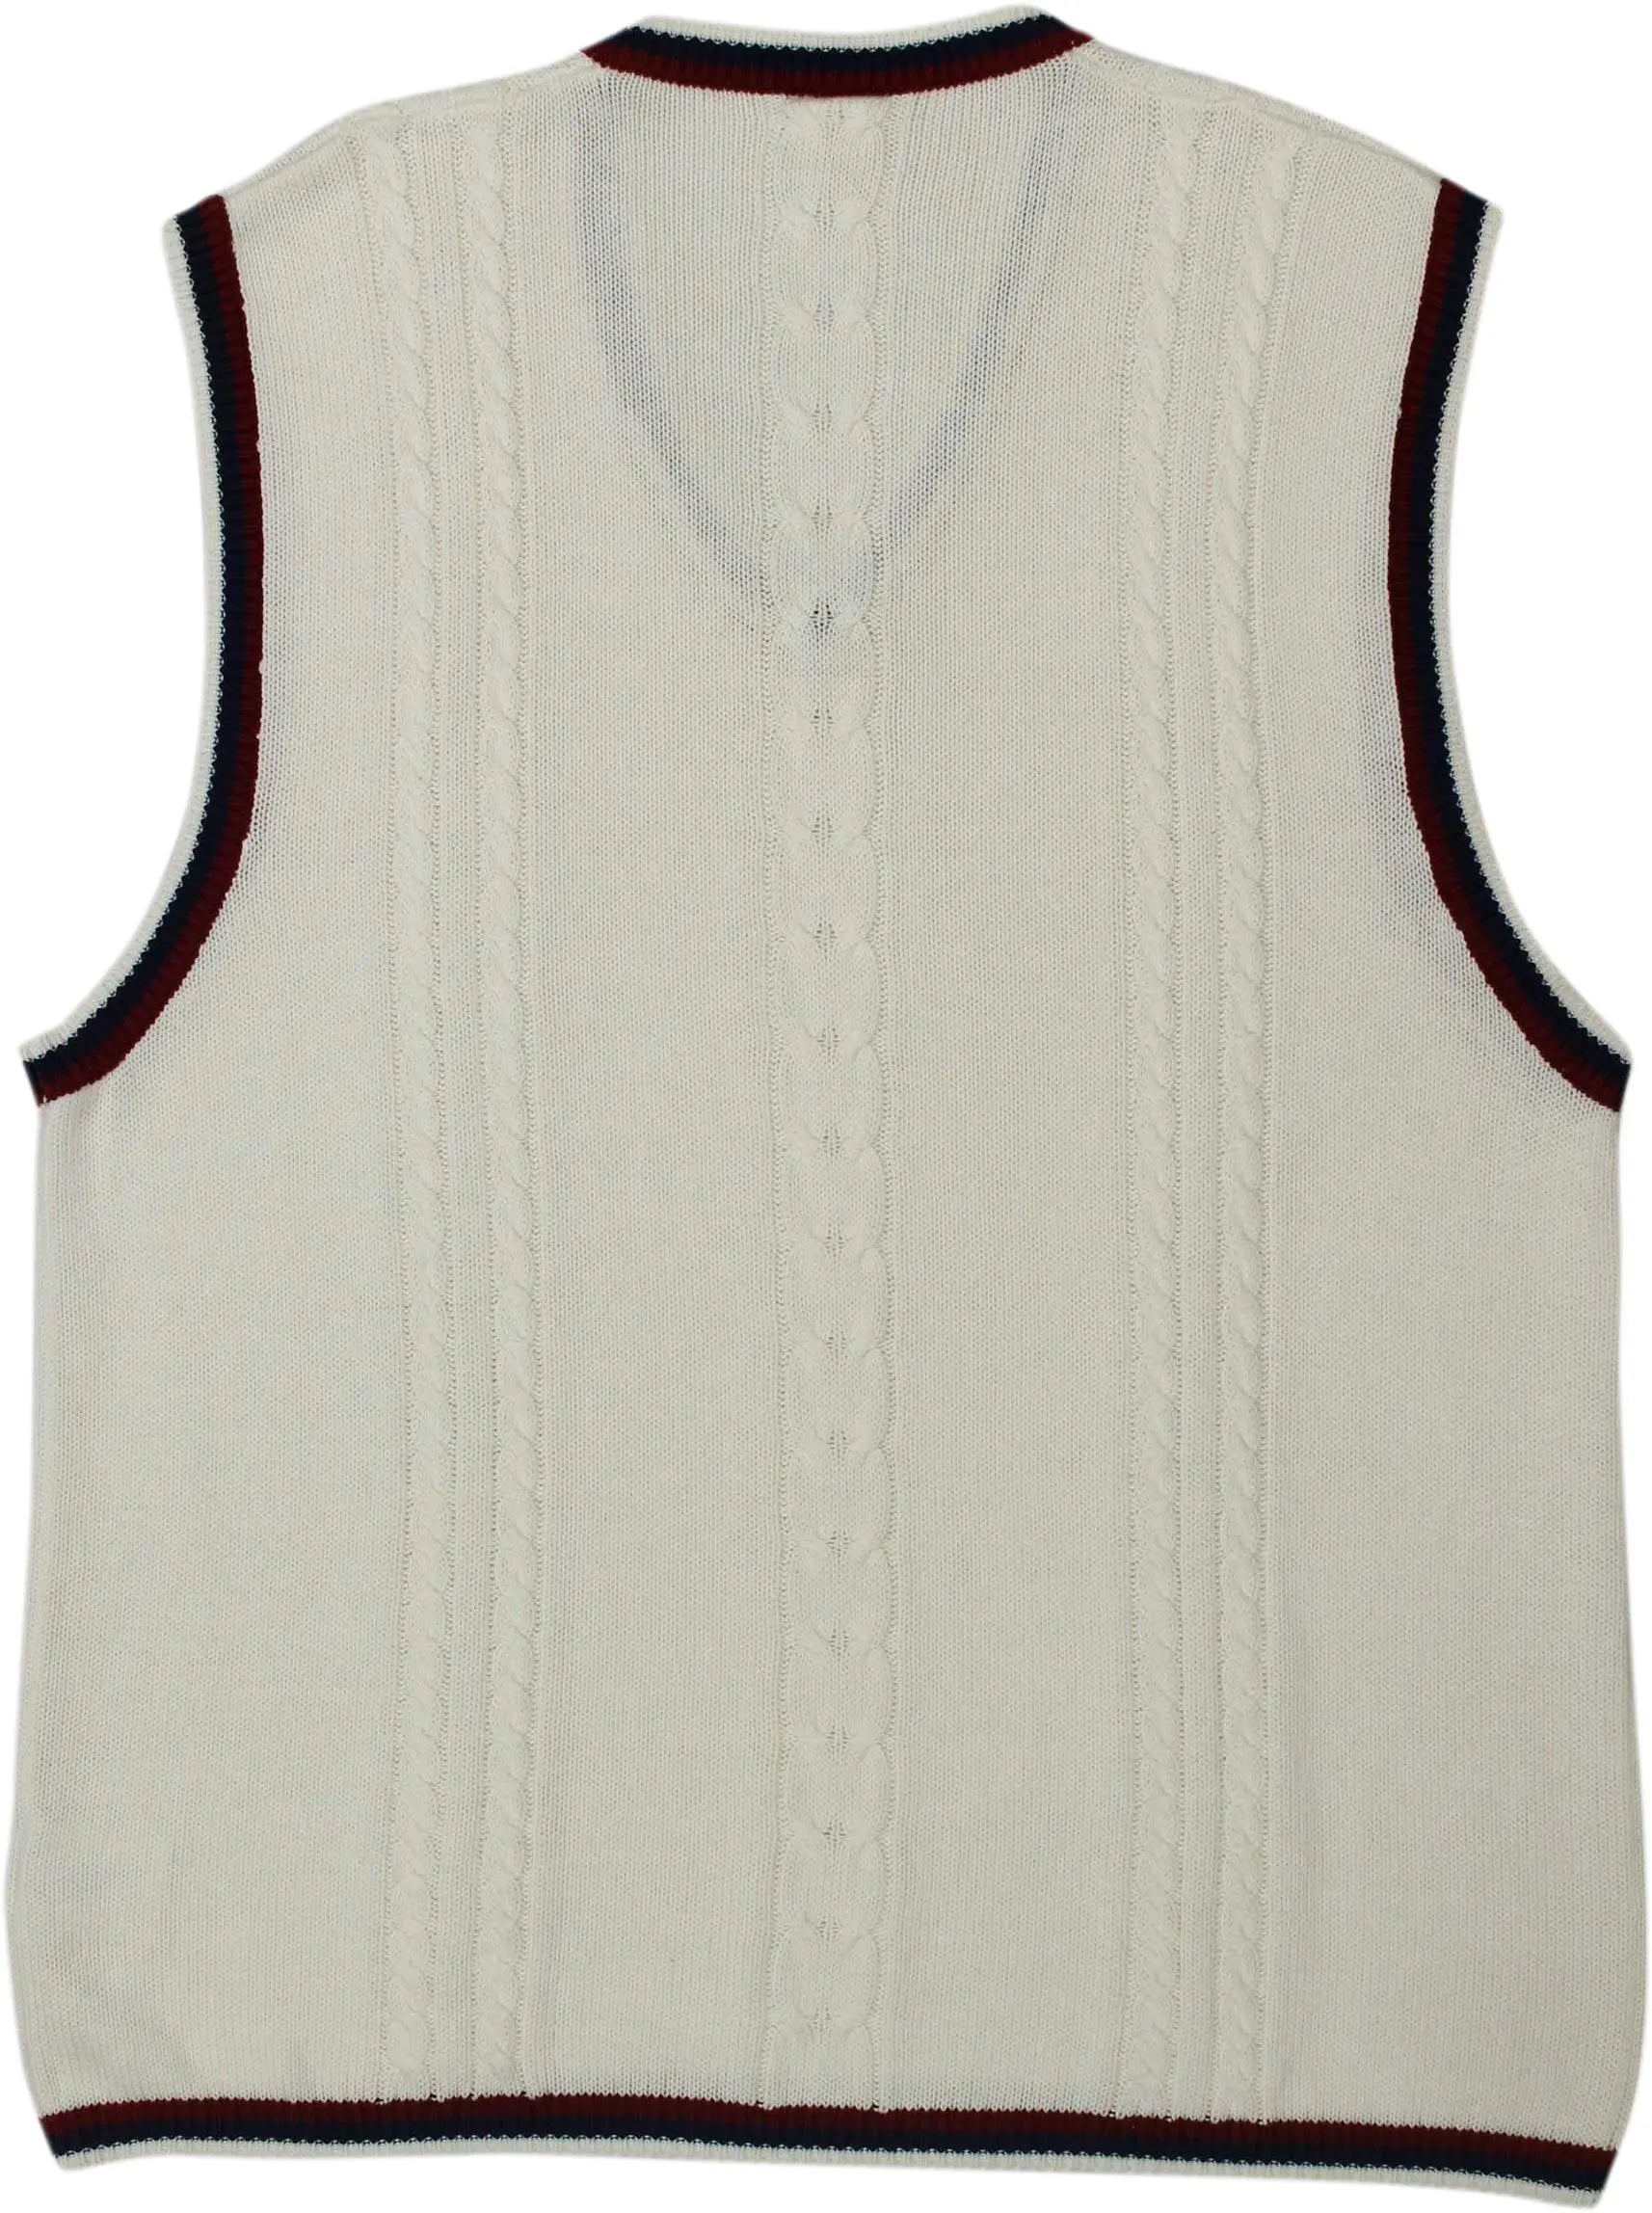 Nike - 90s Nike Knitted Sweater Vest- ThriftTale.com - Vintage and second handclothing